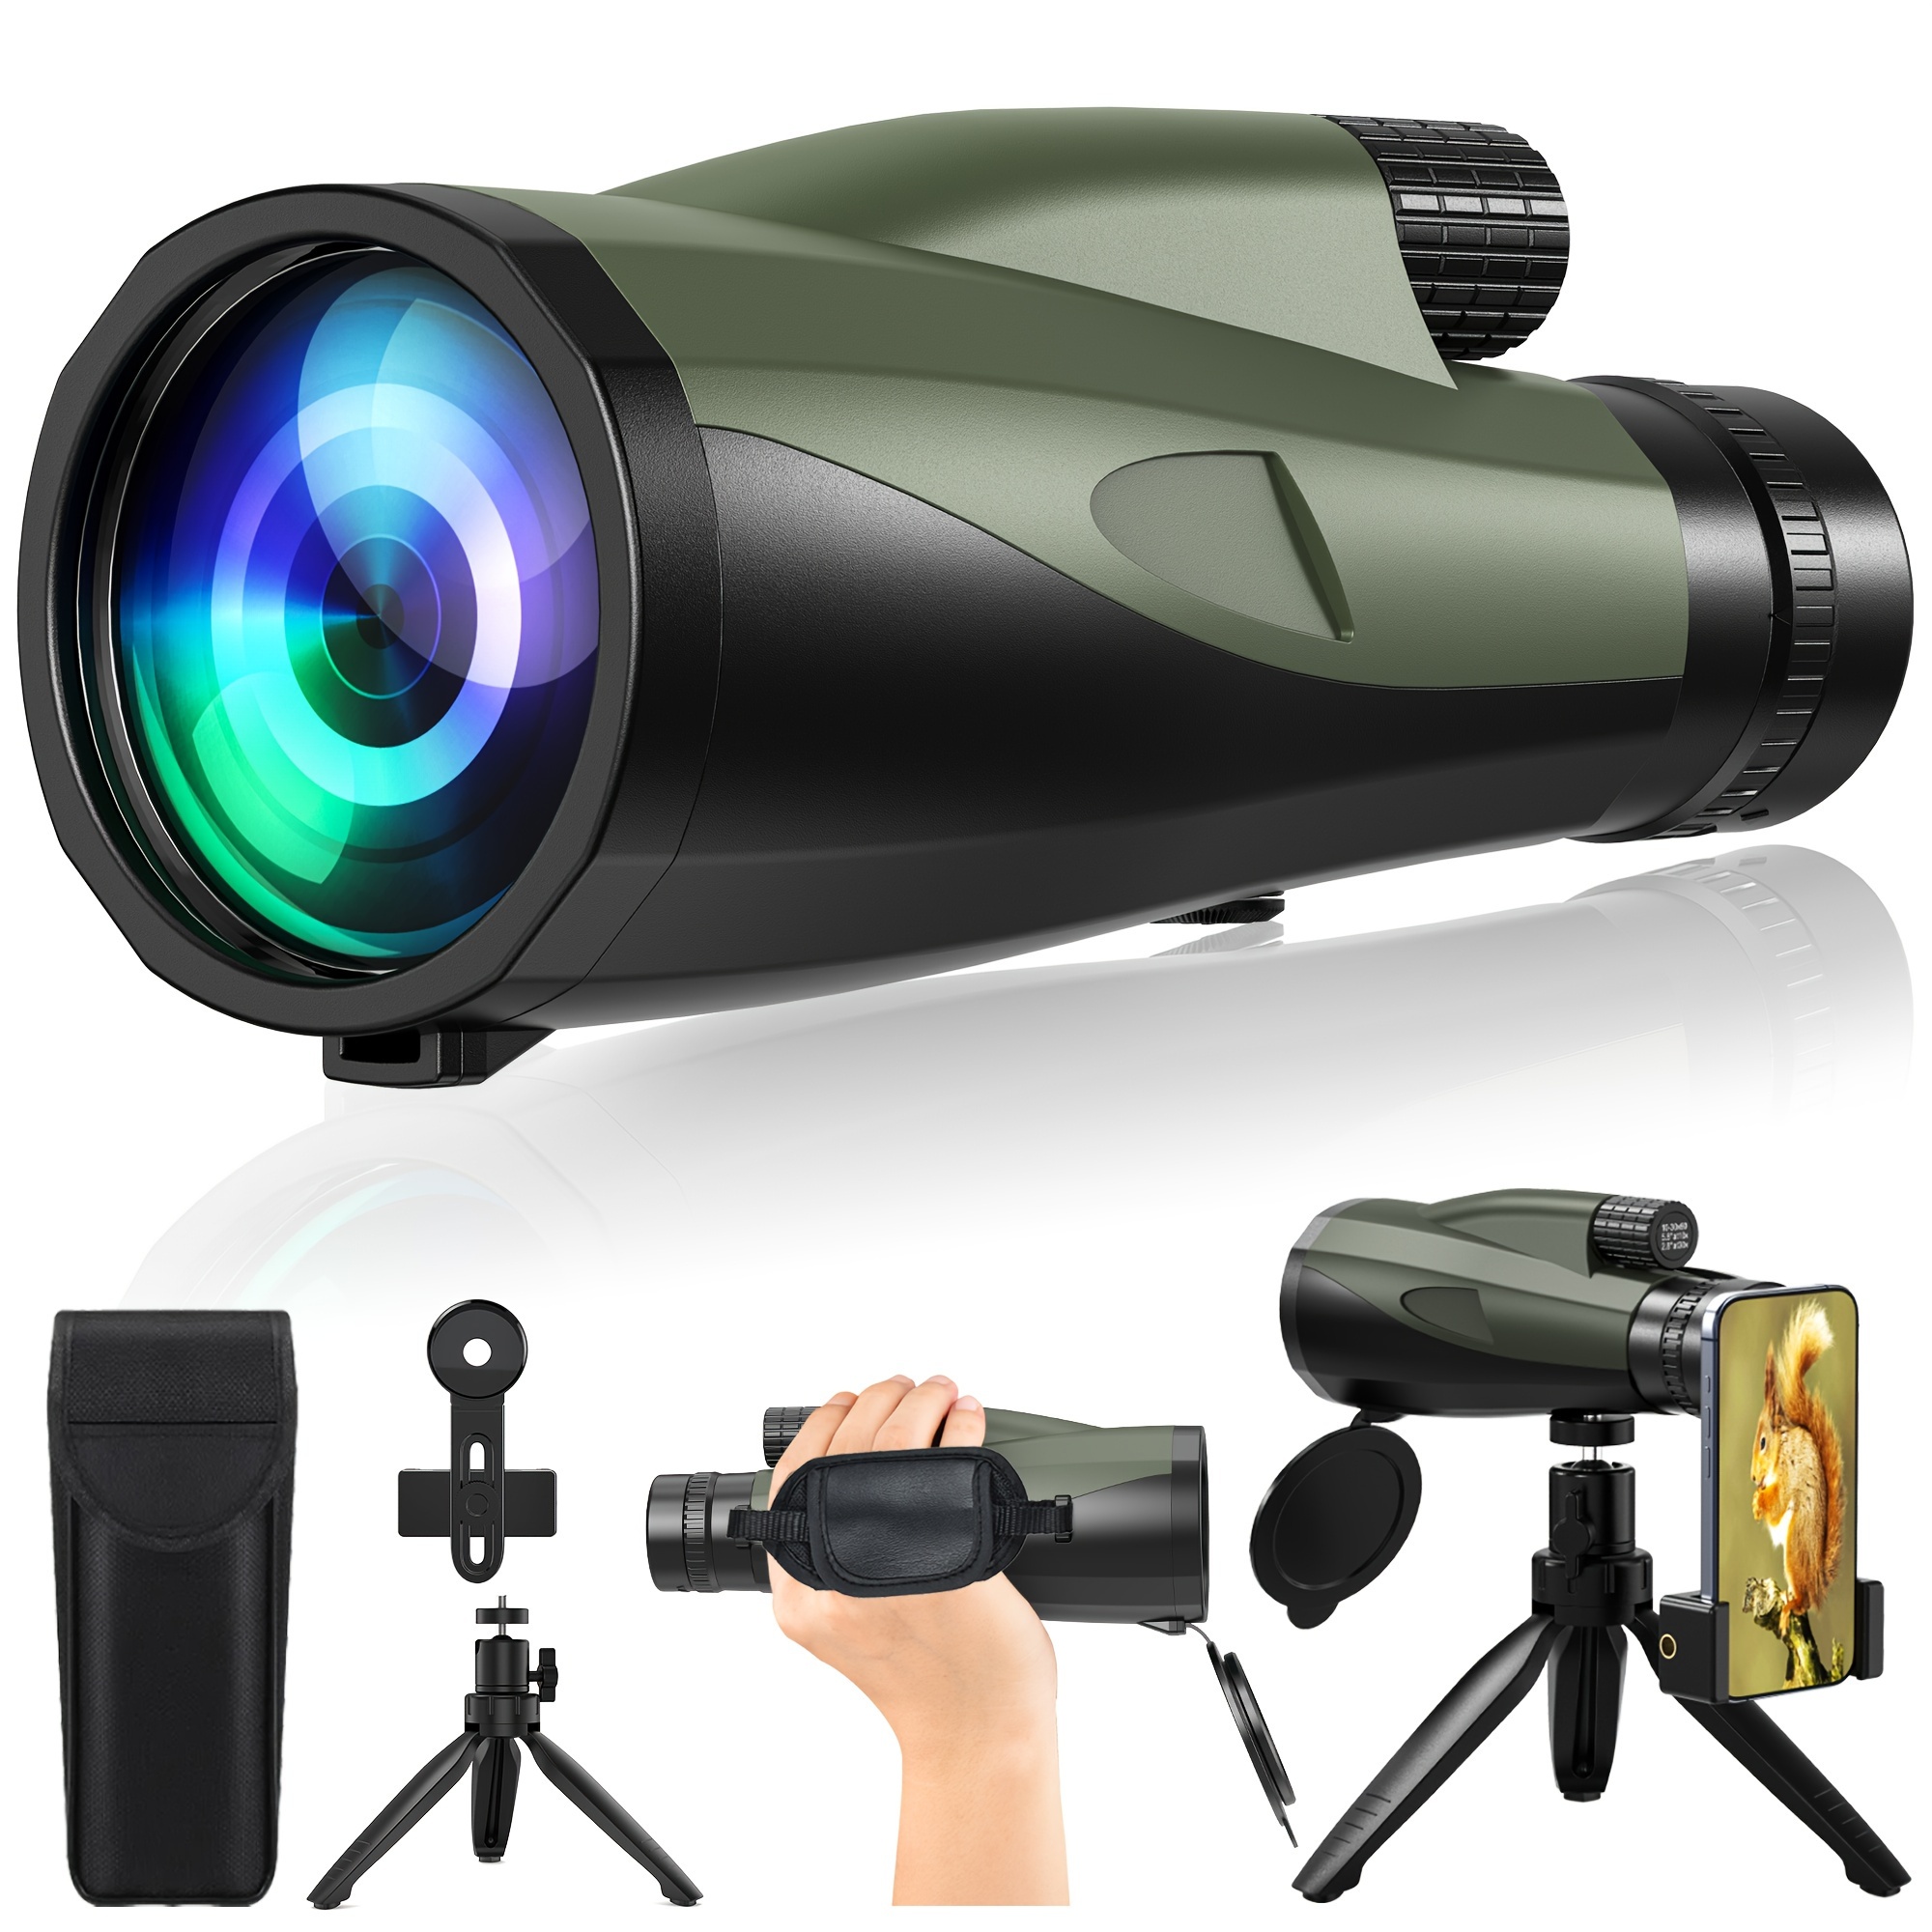 

10-30x60 High Definition Monocular Telescope, Zoom Long-range & Capture Stunning Views With Tripod & Phone Clip, Perfect For Outdoor Adventures